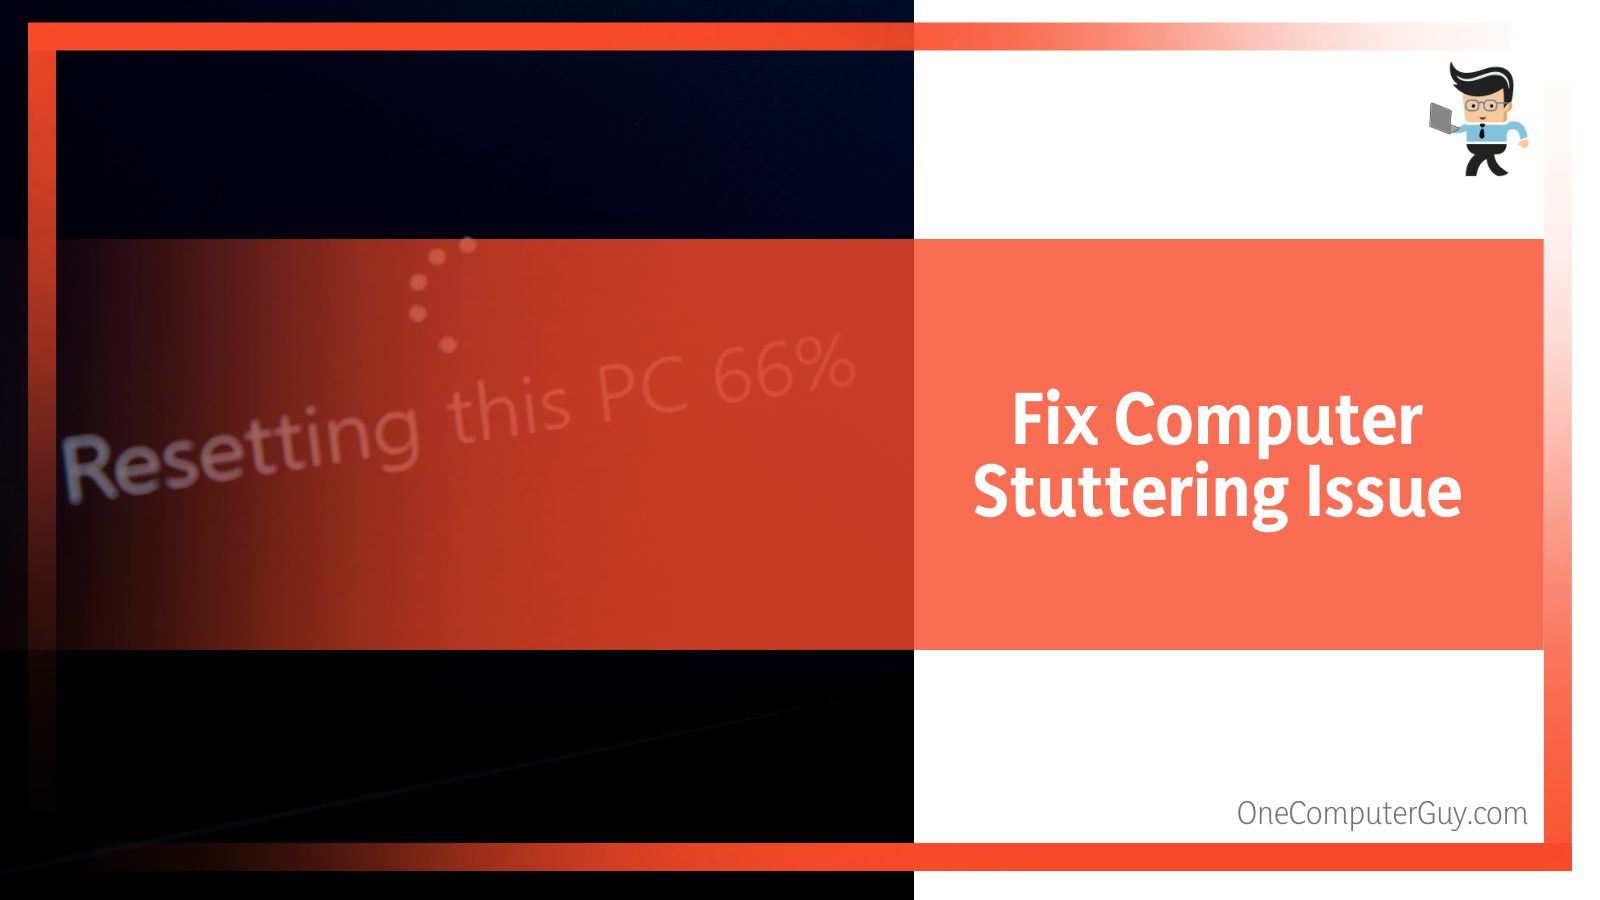 Fix Computer Stuttering Updating your system x